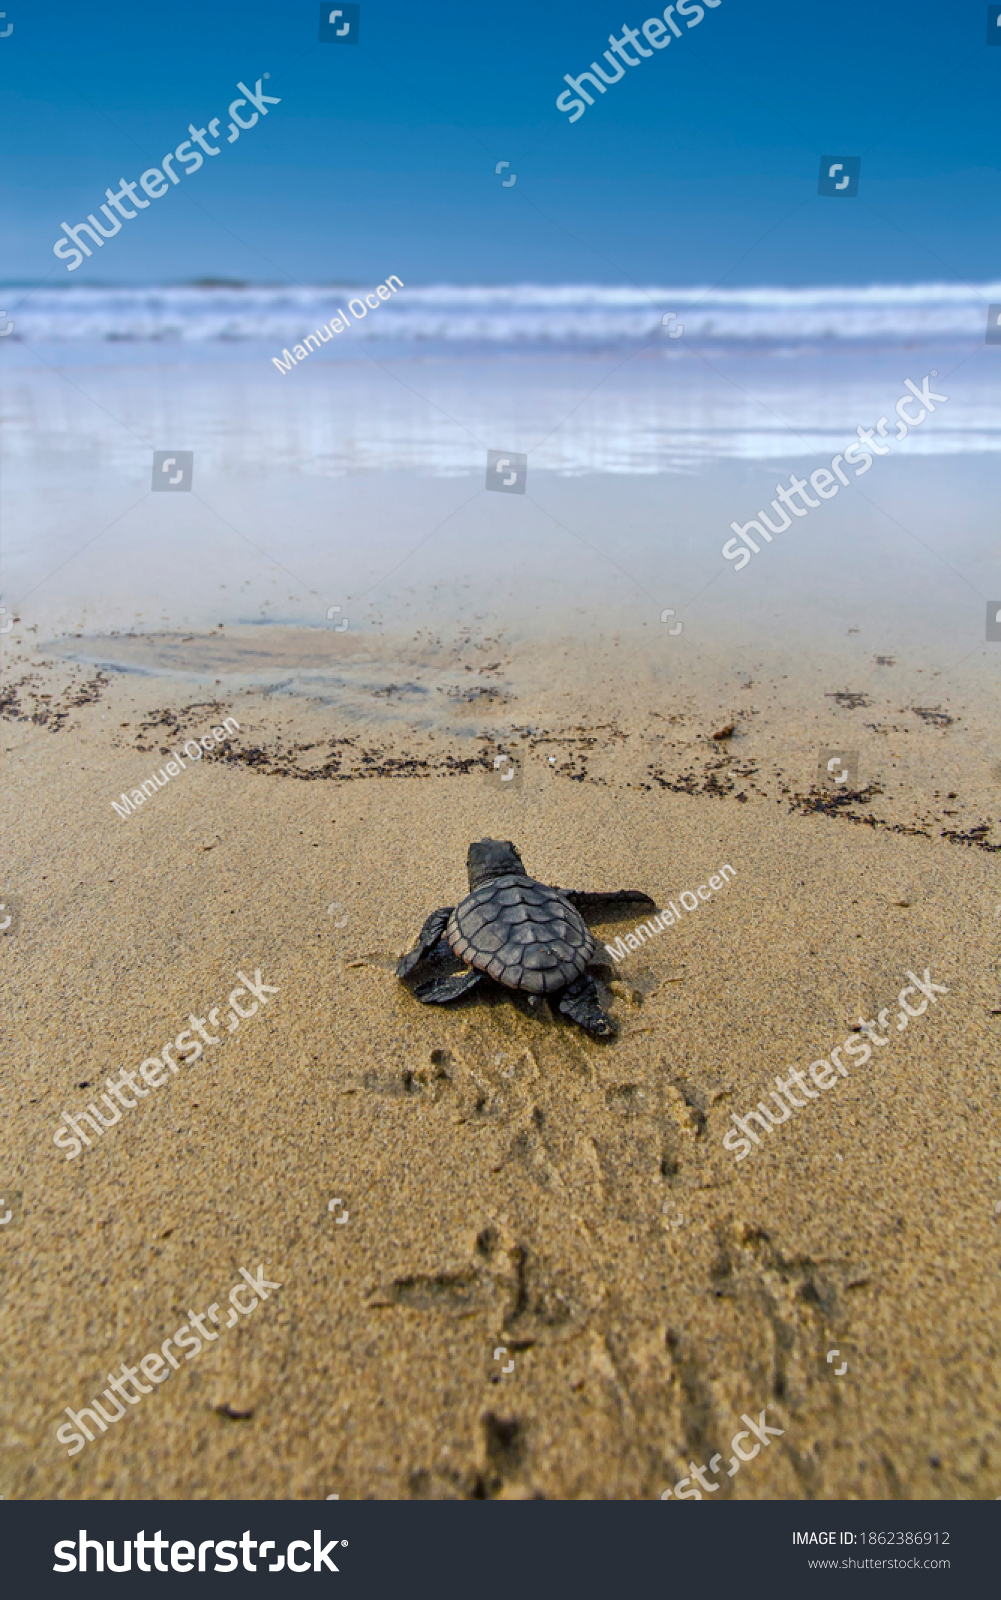 The loggerhead sea turtle after being born on a beach in Boa Vista, Cape Verde, goes to the sea. #1862386912